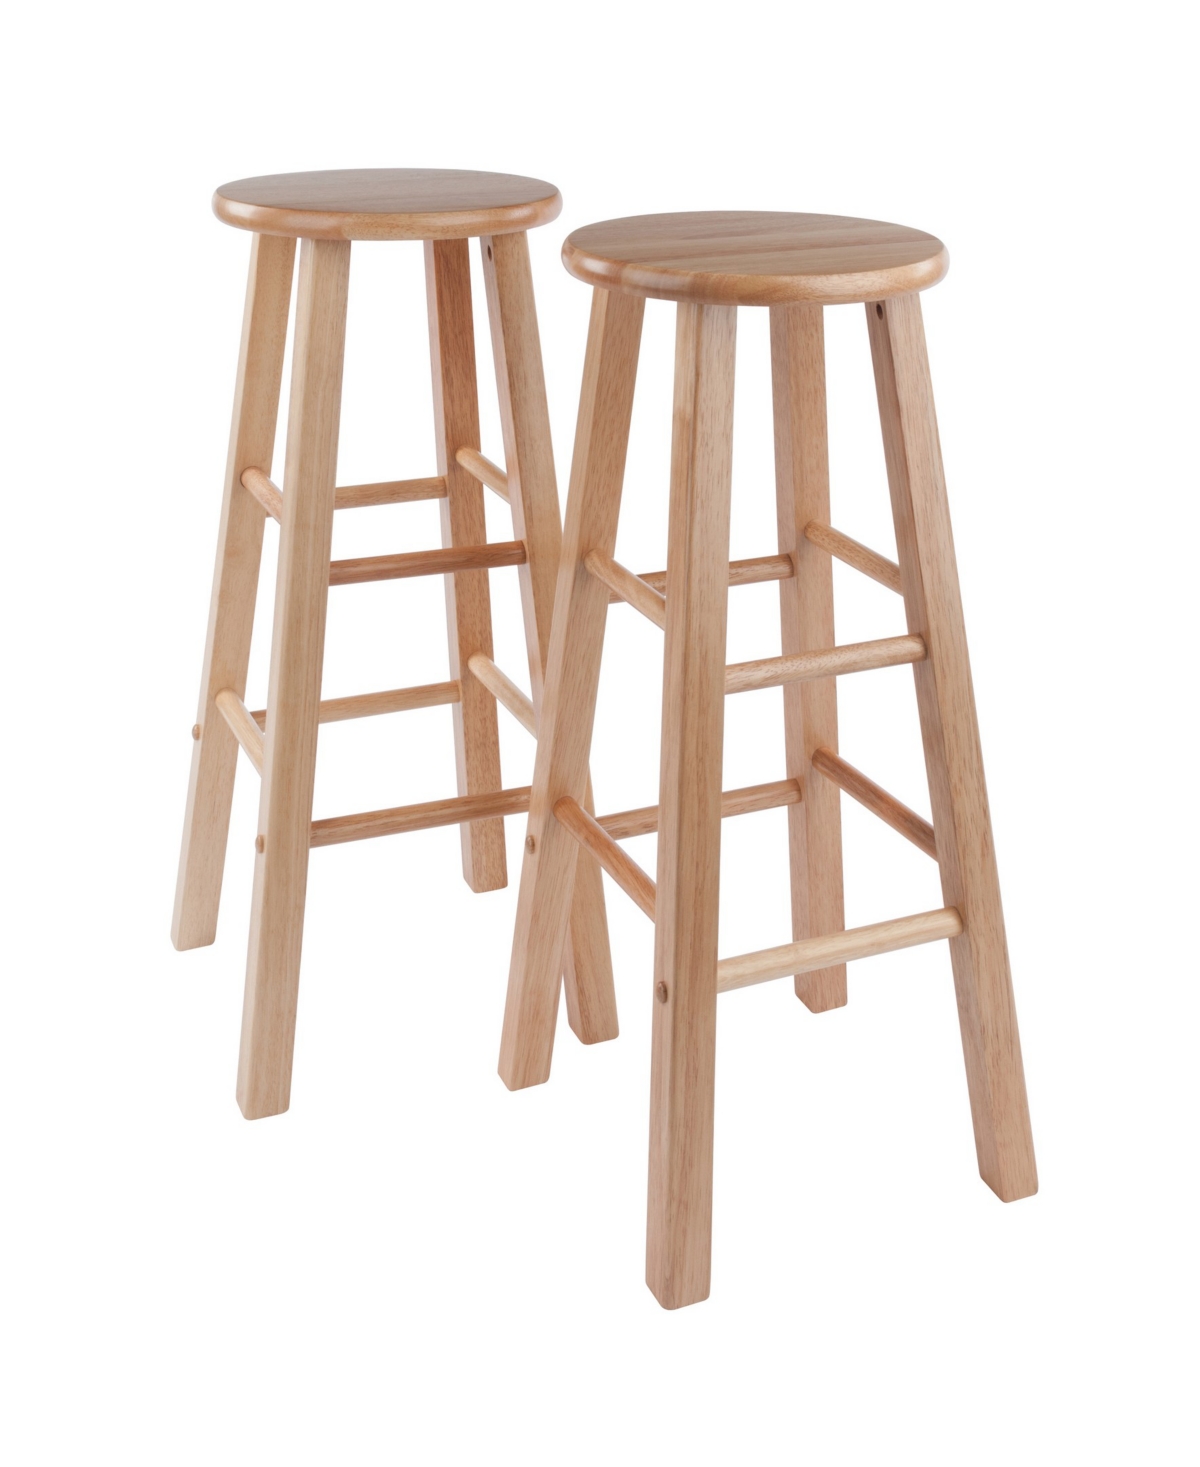 Winsome Element 2-piece Wood Bar Stool Set In Natural